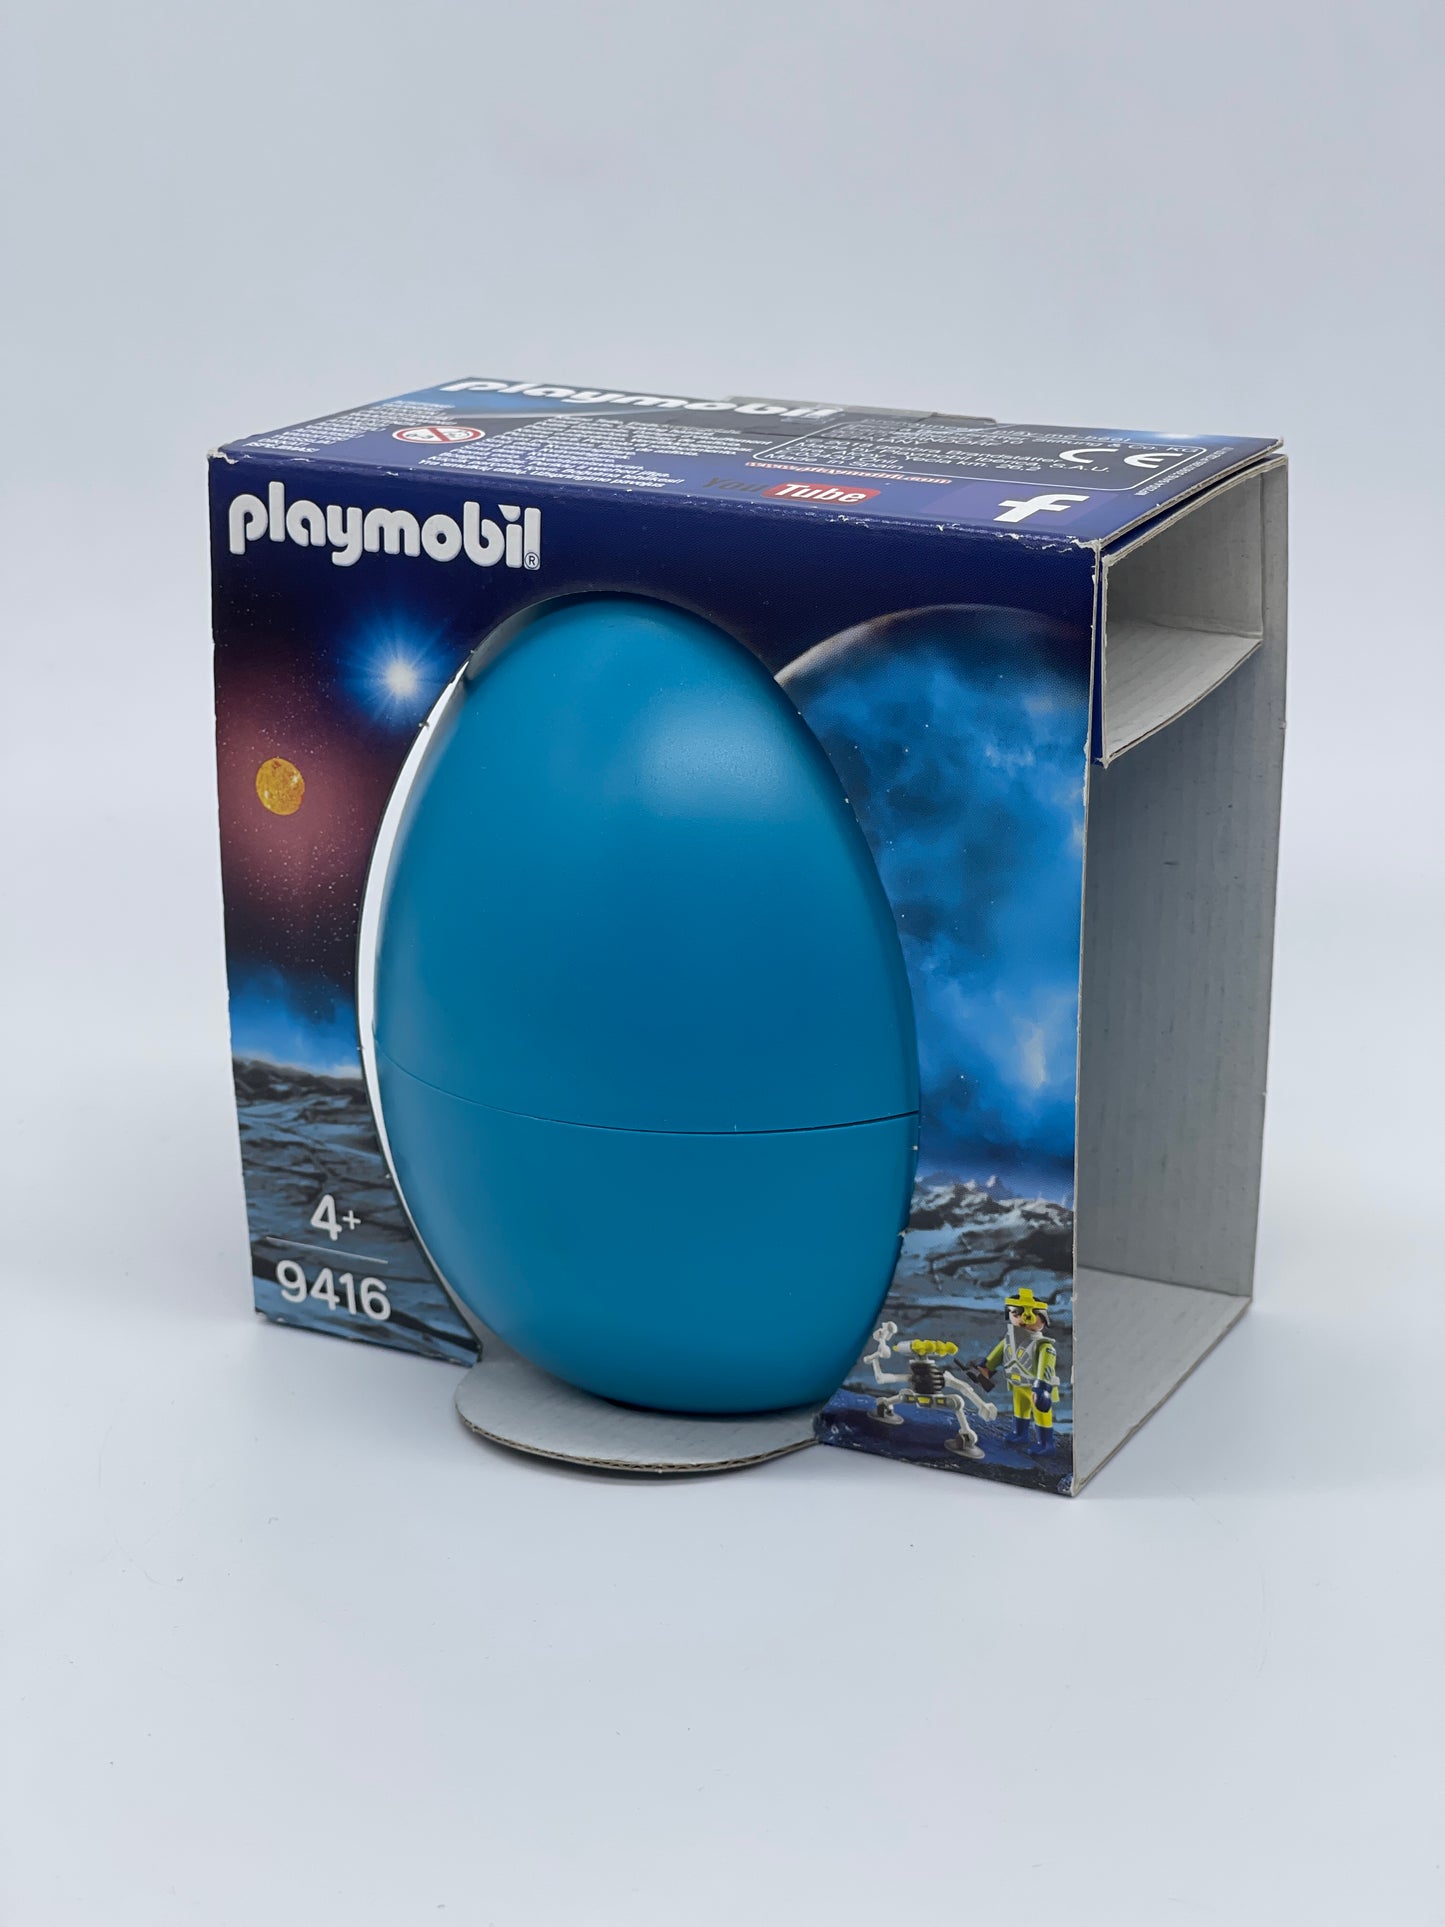 Playmobil 9416 - Space Agent with robot - in an Easter egg / great gift idea